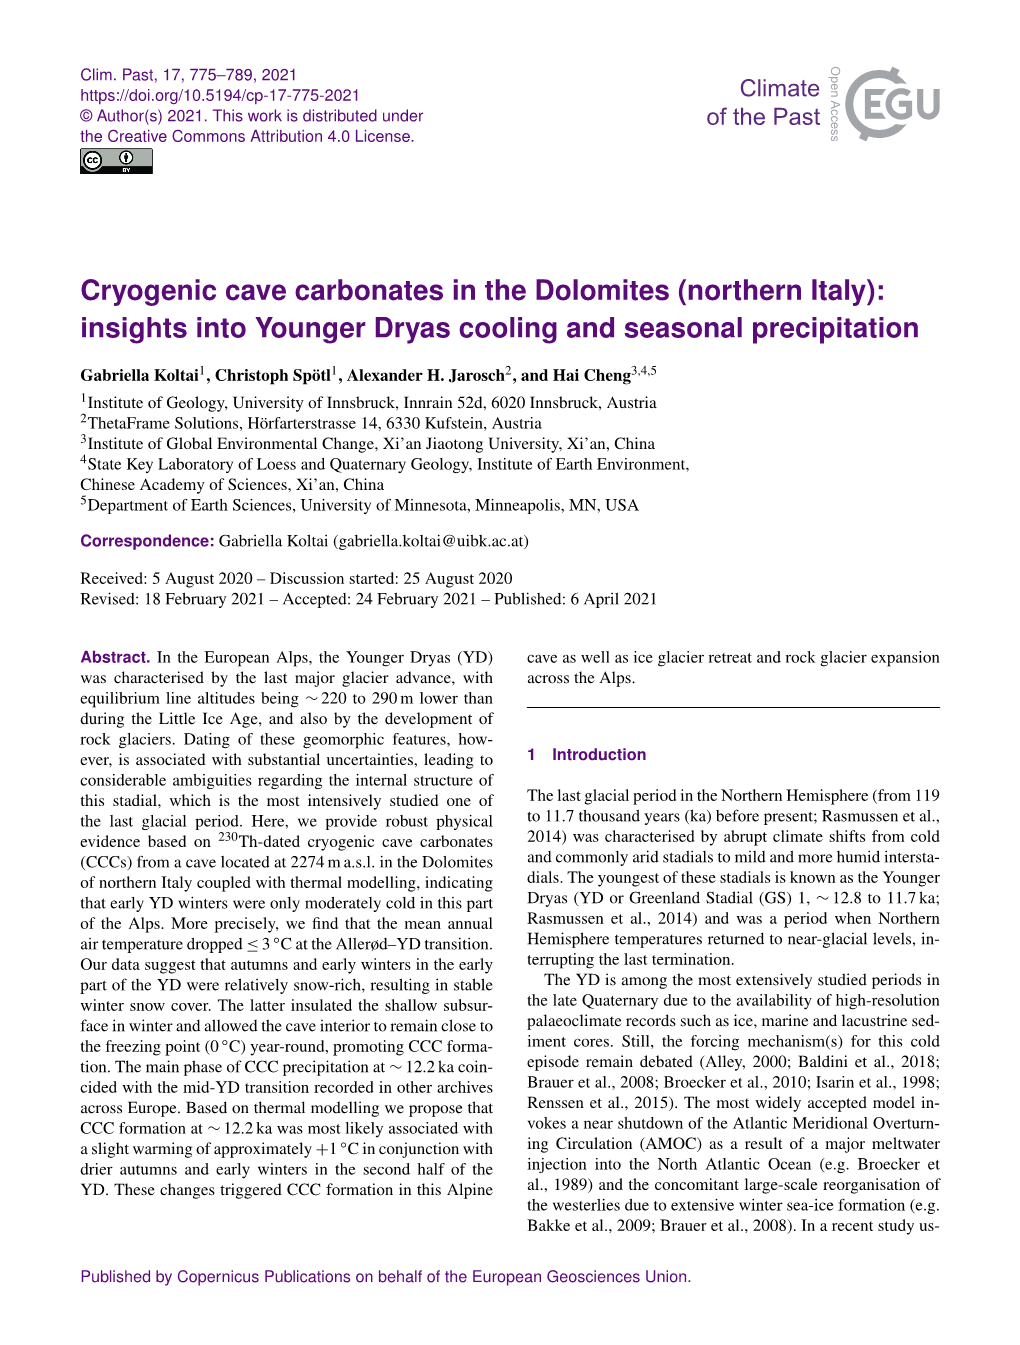 Cryogenic Cave Carbonates in the Dolomites (Northern Italy): Insights Into Younger Dryas Cooling and Seasonal Precipitation